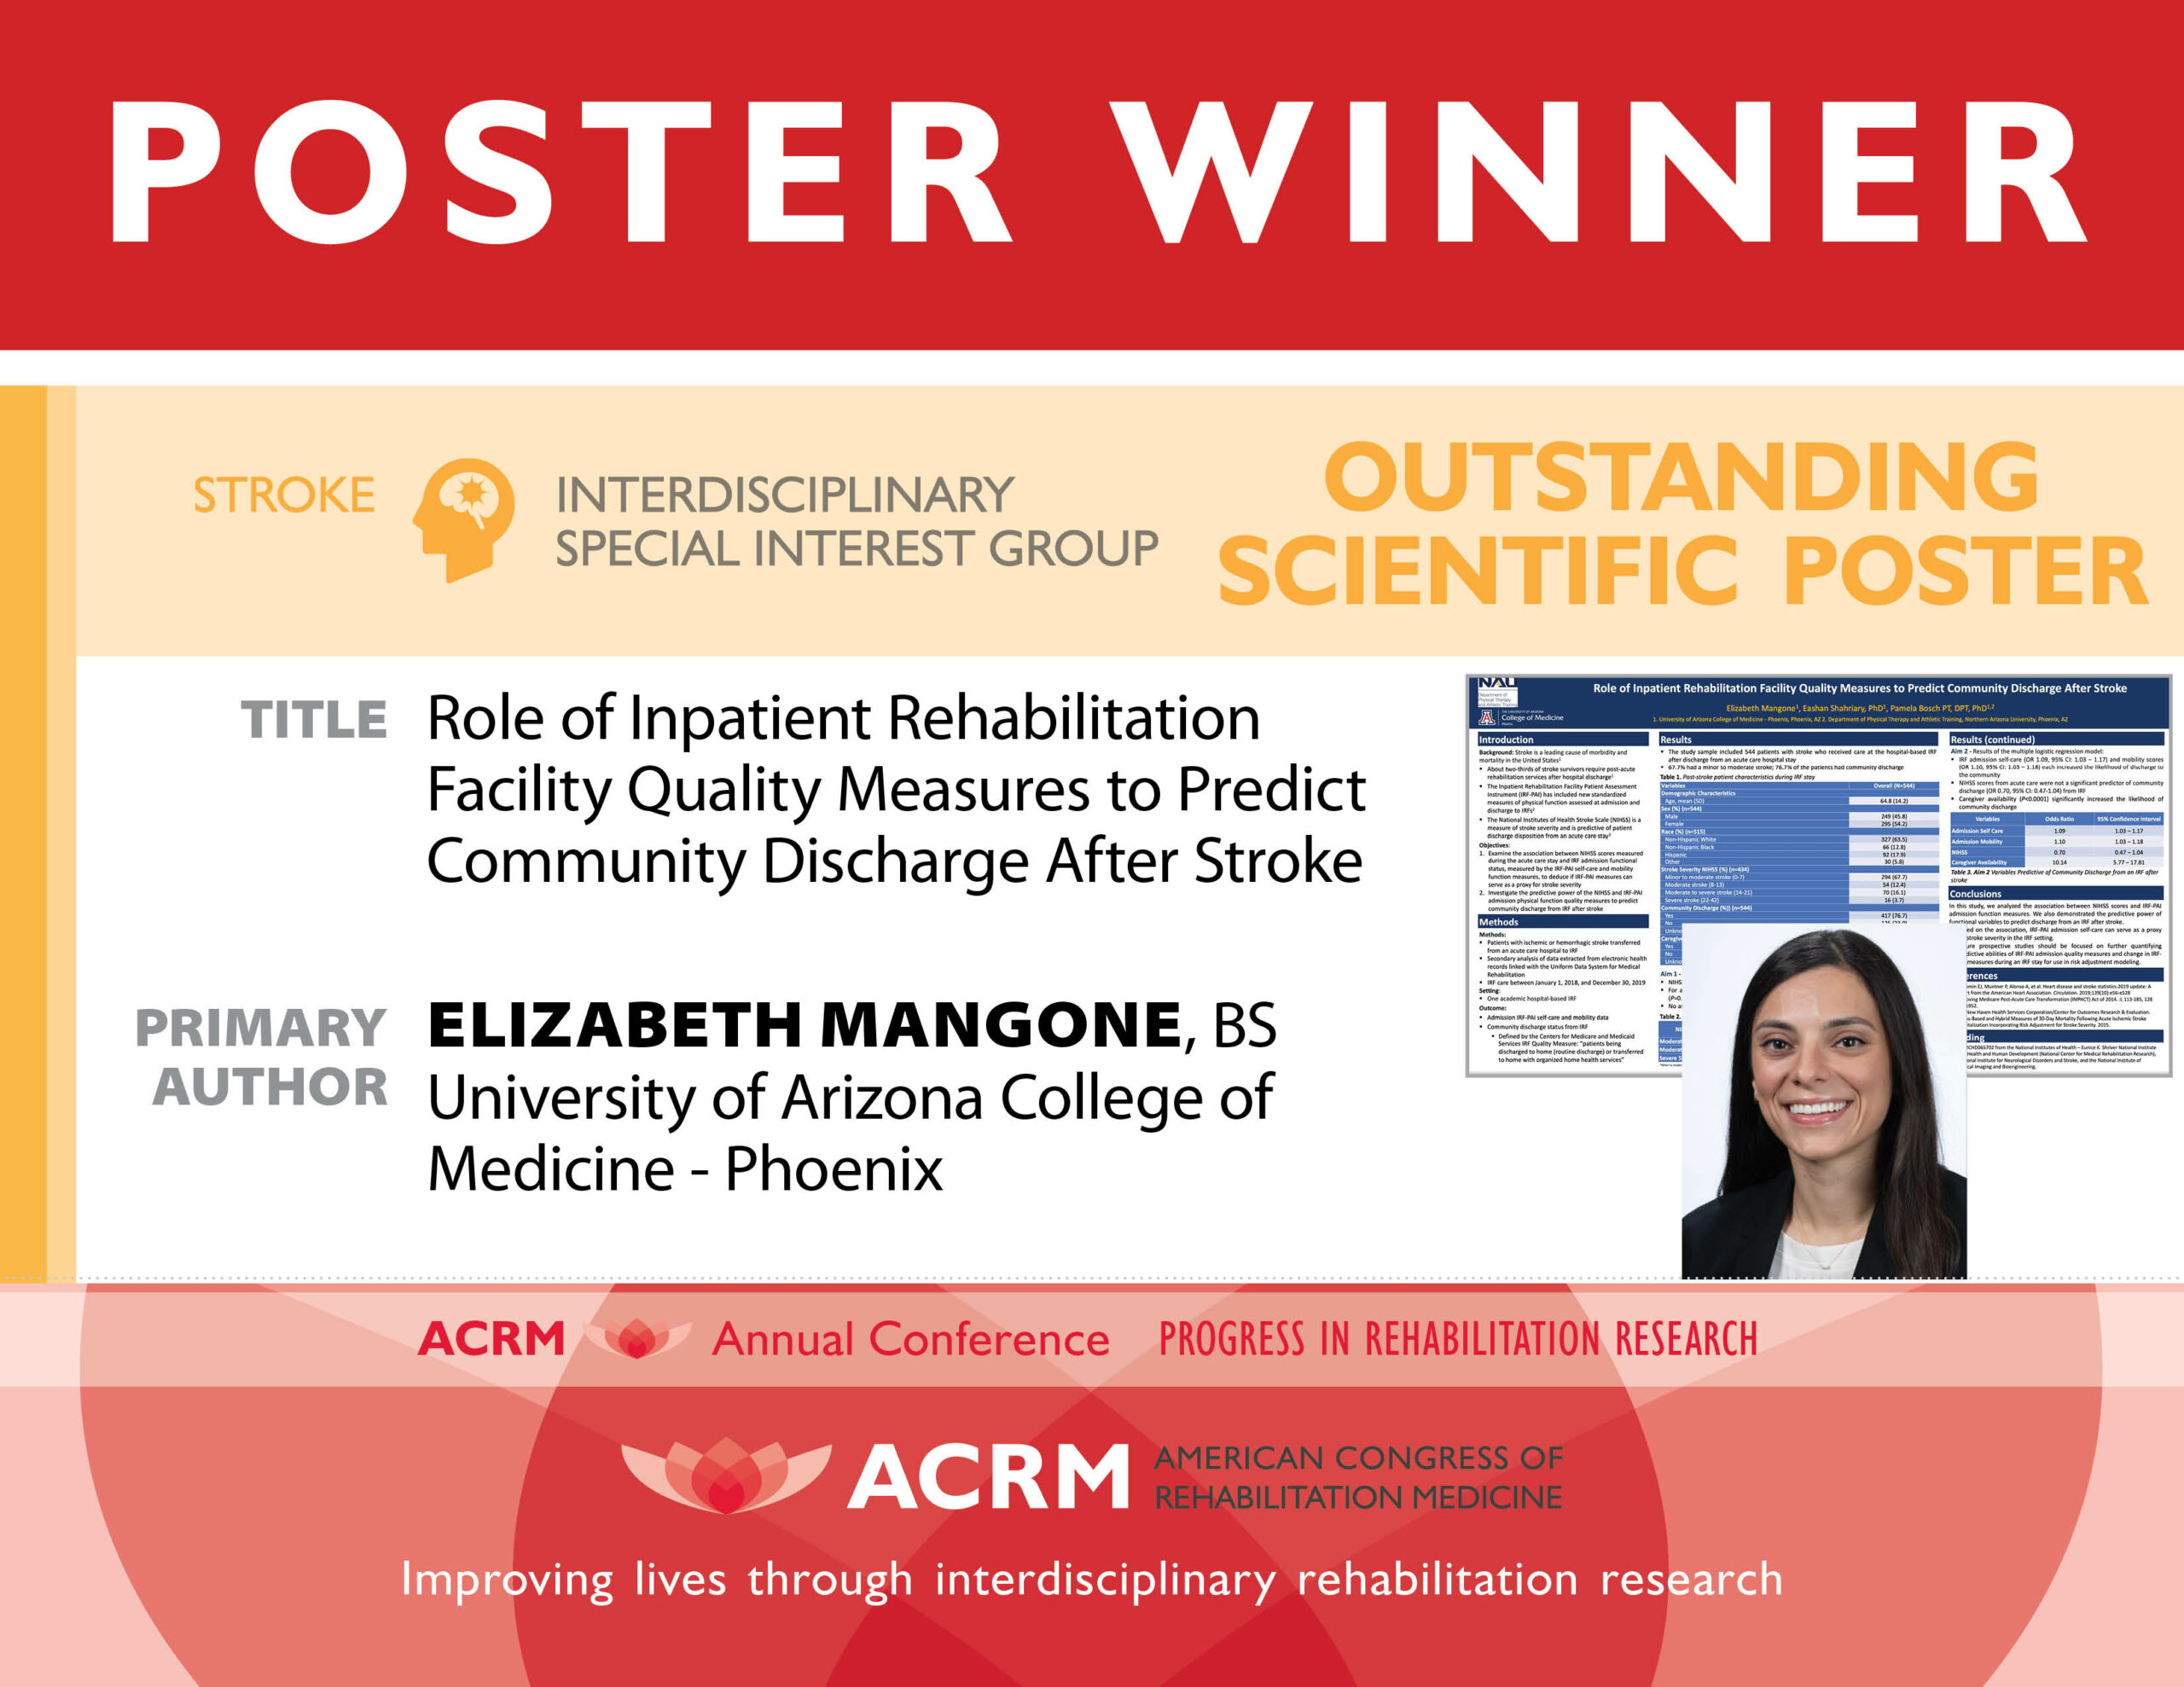 Stroke ISIG 2021 Outstanding Poster Award - image